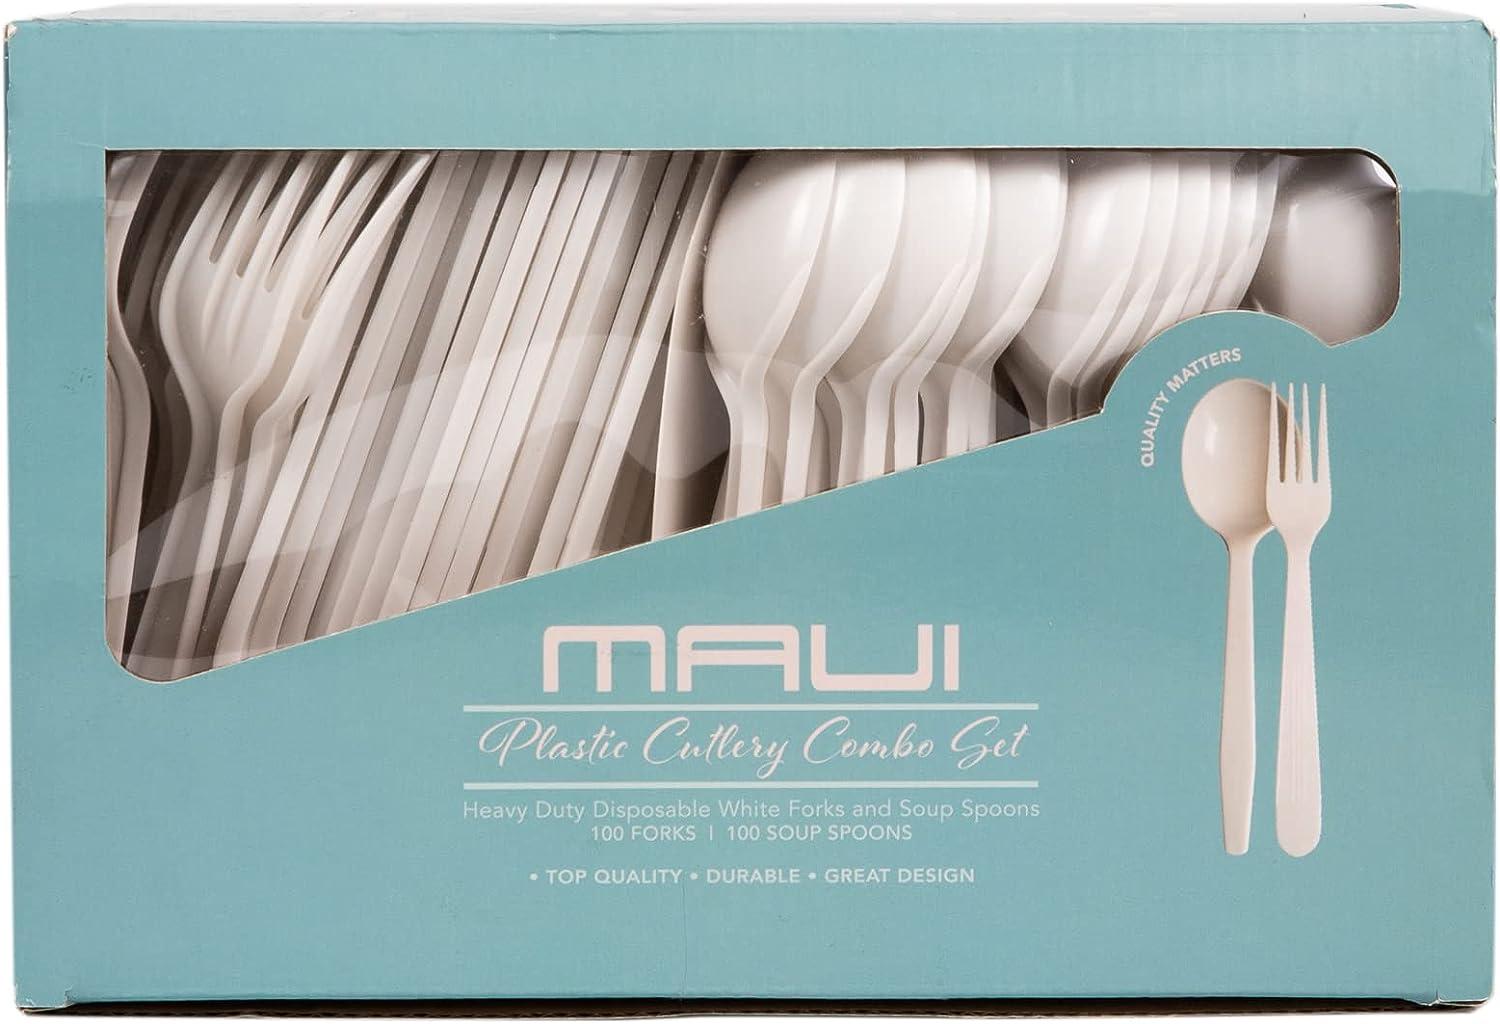 MAUI Plastic Forks And Spoons- Heavy Duty Disposable 100 Forks & 100 deep  wide Soup Spoons(Set of 200 Total) - Strong Heavyweight Easy to Open Set 